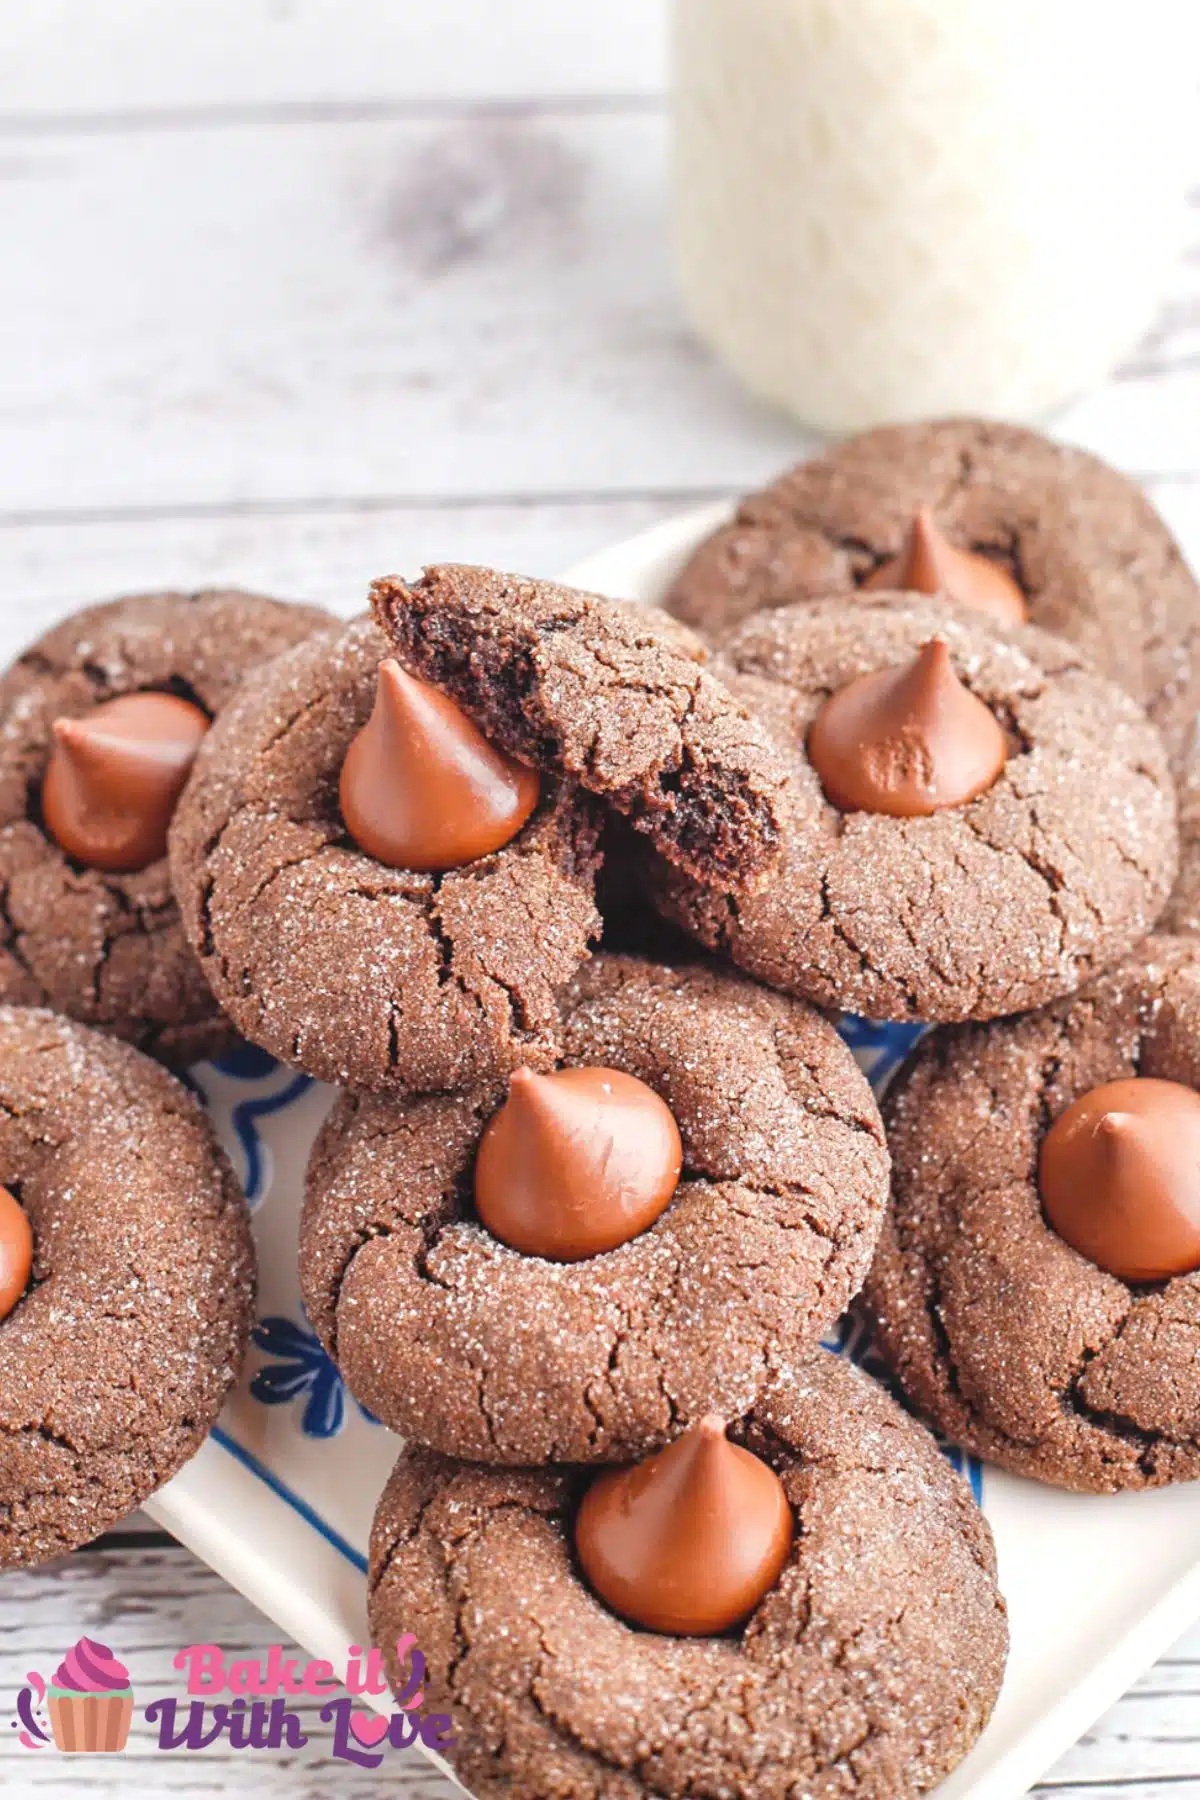 Best chocolate blossom cookies on serving plate and light background with glass of milk in the background.